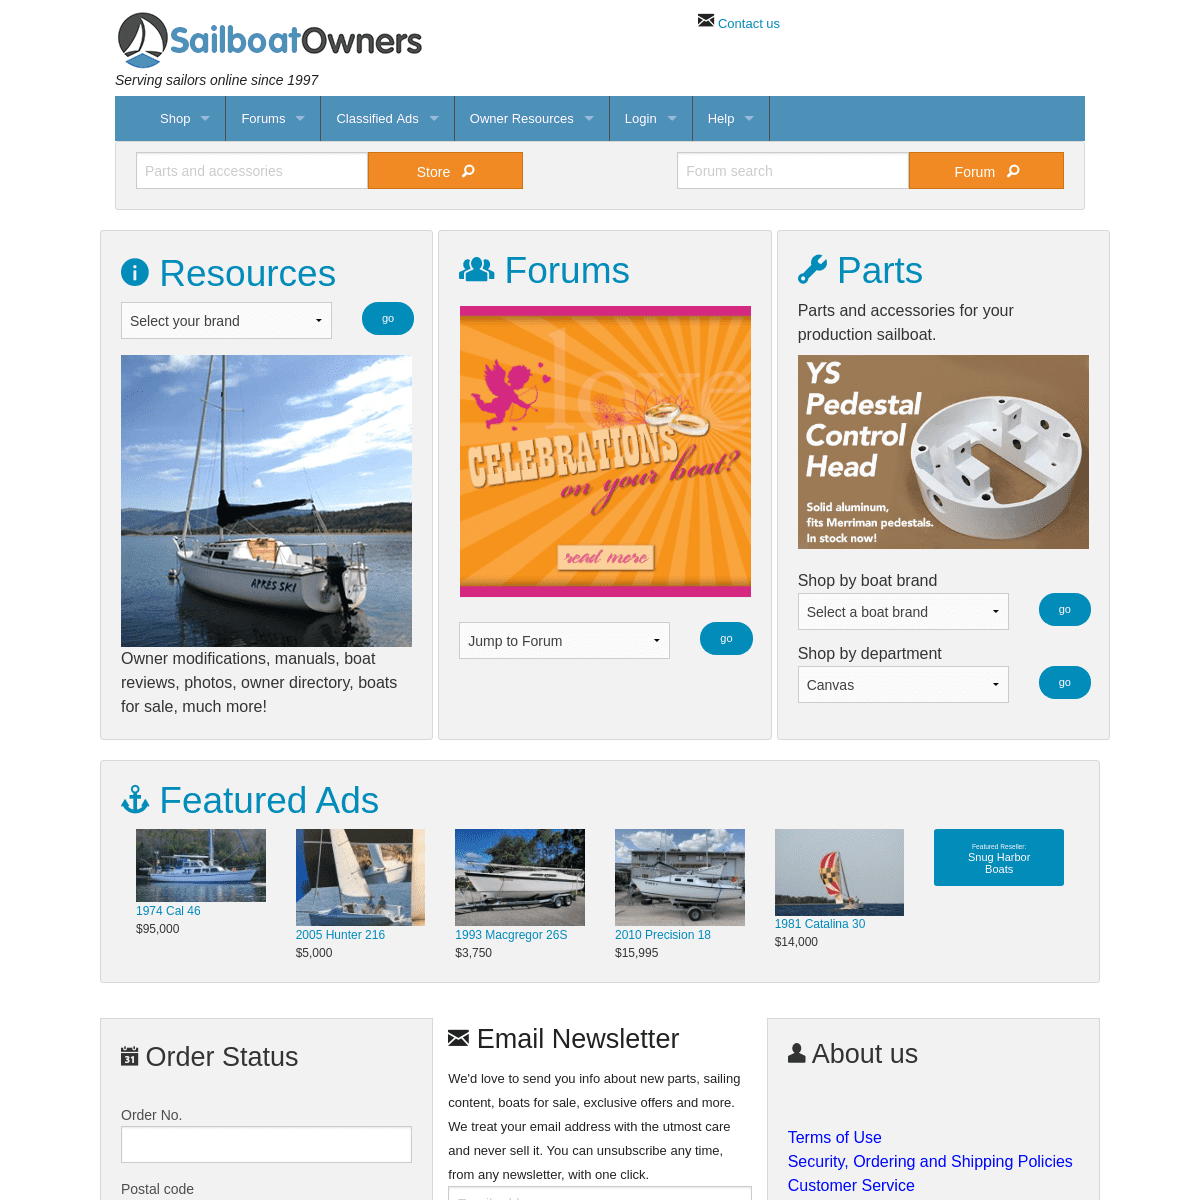 Owner resources, parts, accessories, boats for sale, and more.